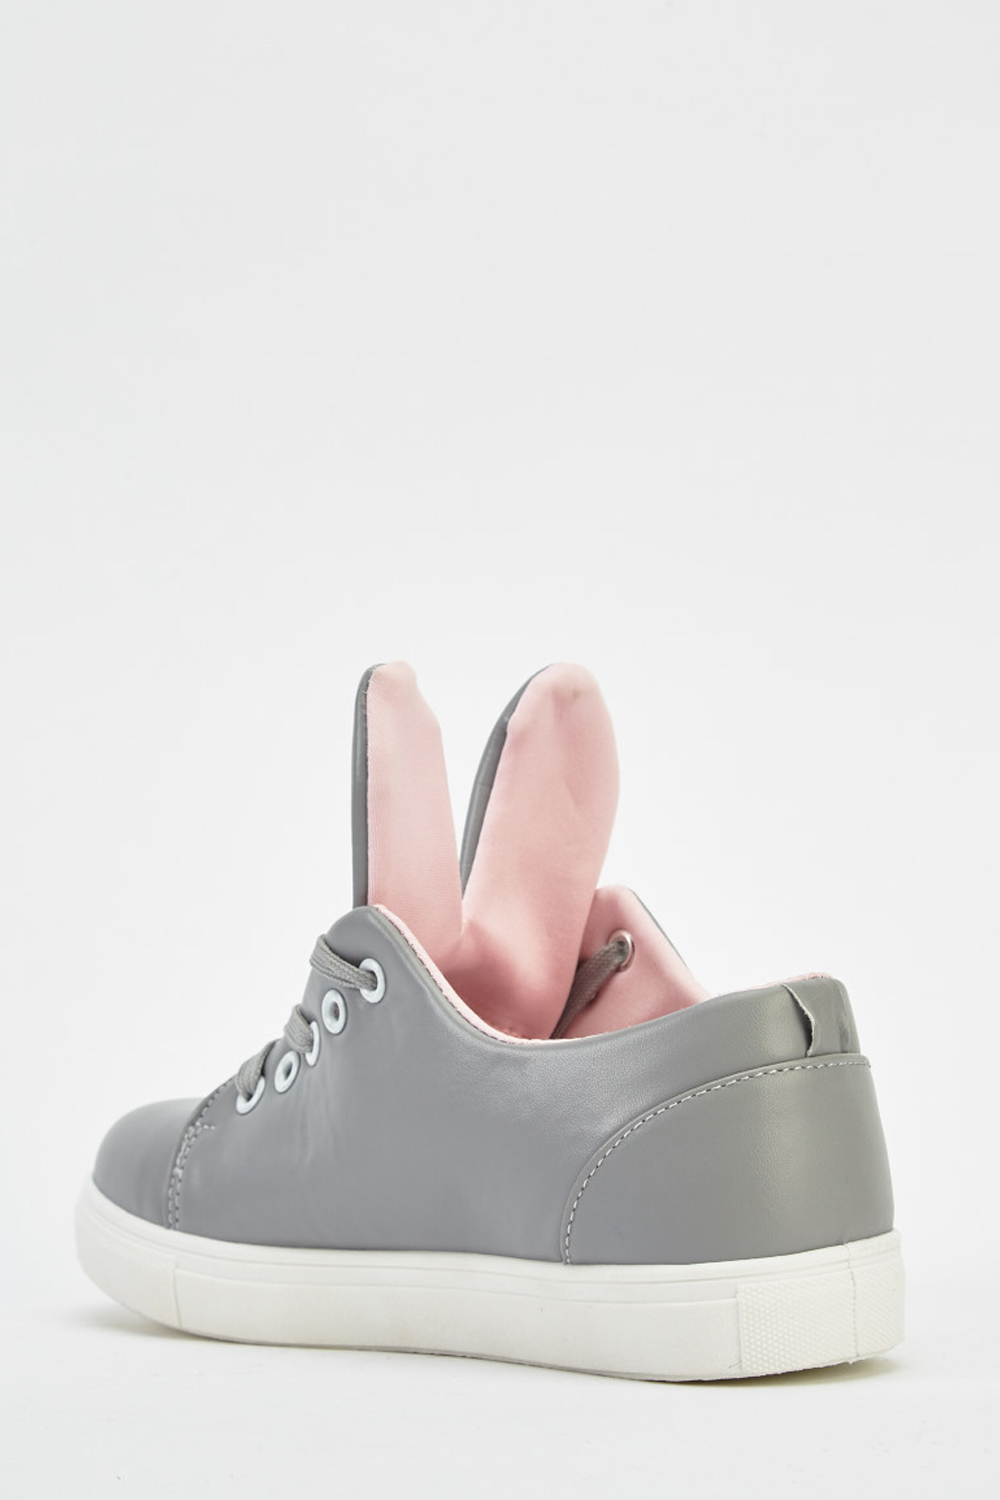 Bunny Ear Low Top Trainers - Just $6